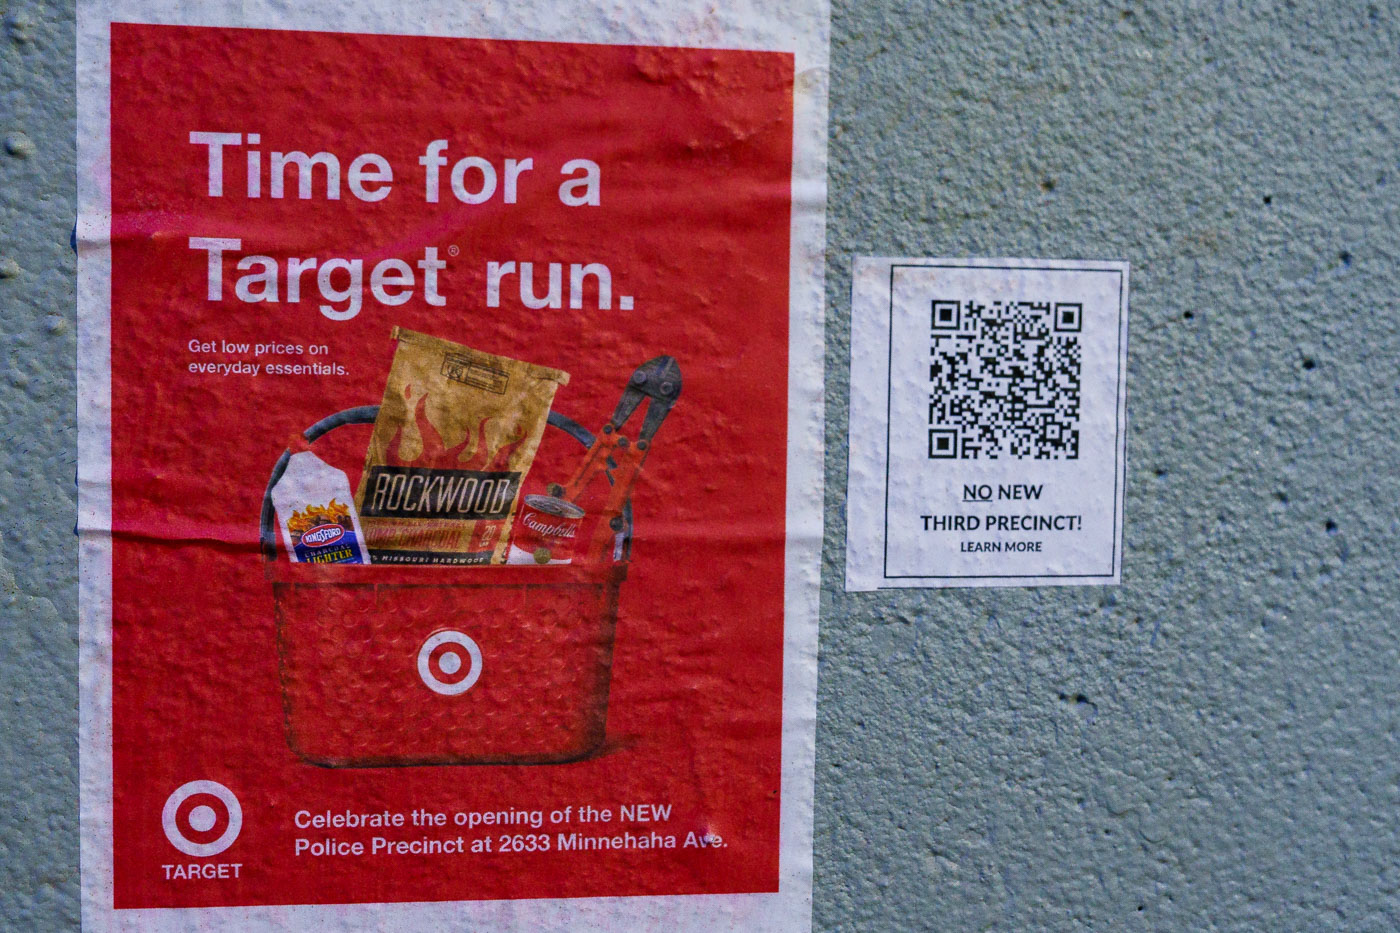 Flyers seen around the third precinct in South Minneapolis protesting the building of a replacement Minneapolis Police Third Precinct. "Time for a target run" "Celebrate the opening of the NEW Police Precinct at 2633 Minnehaha Ave."